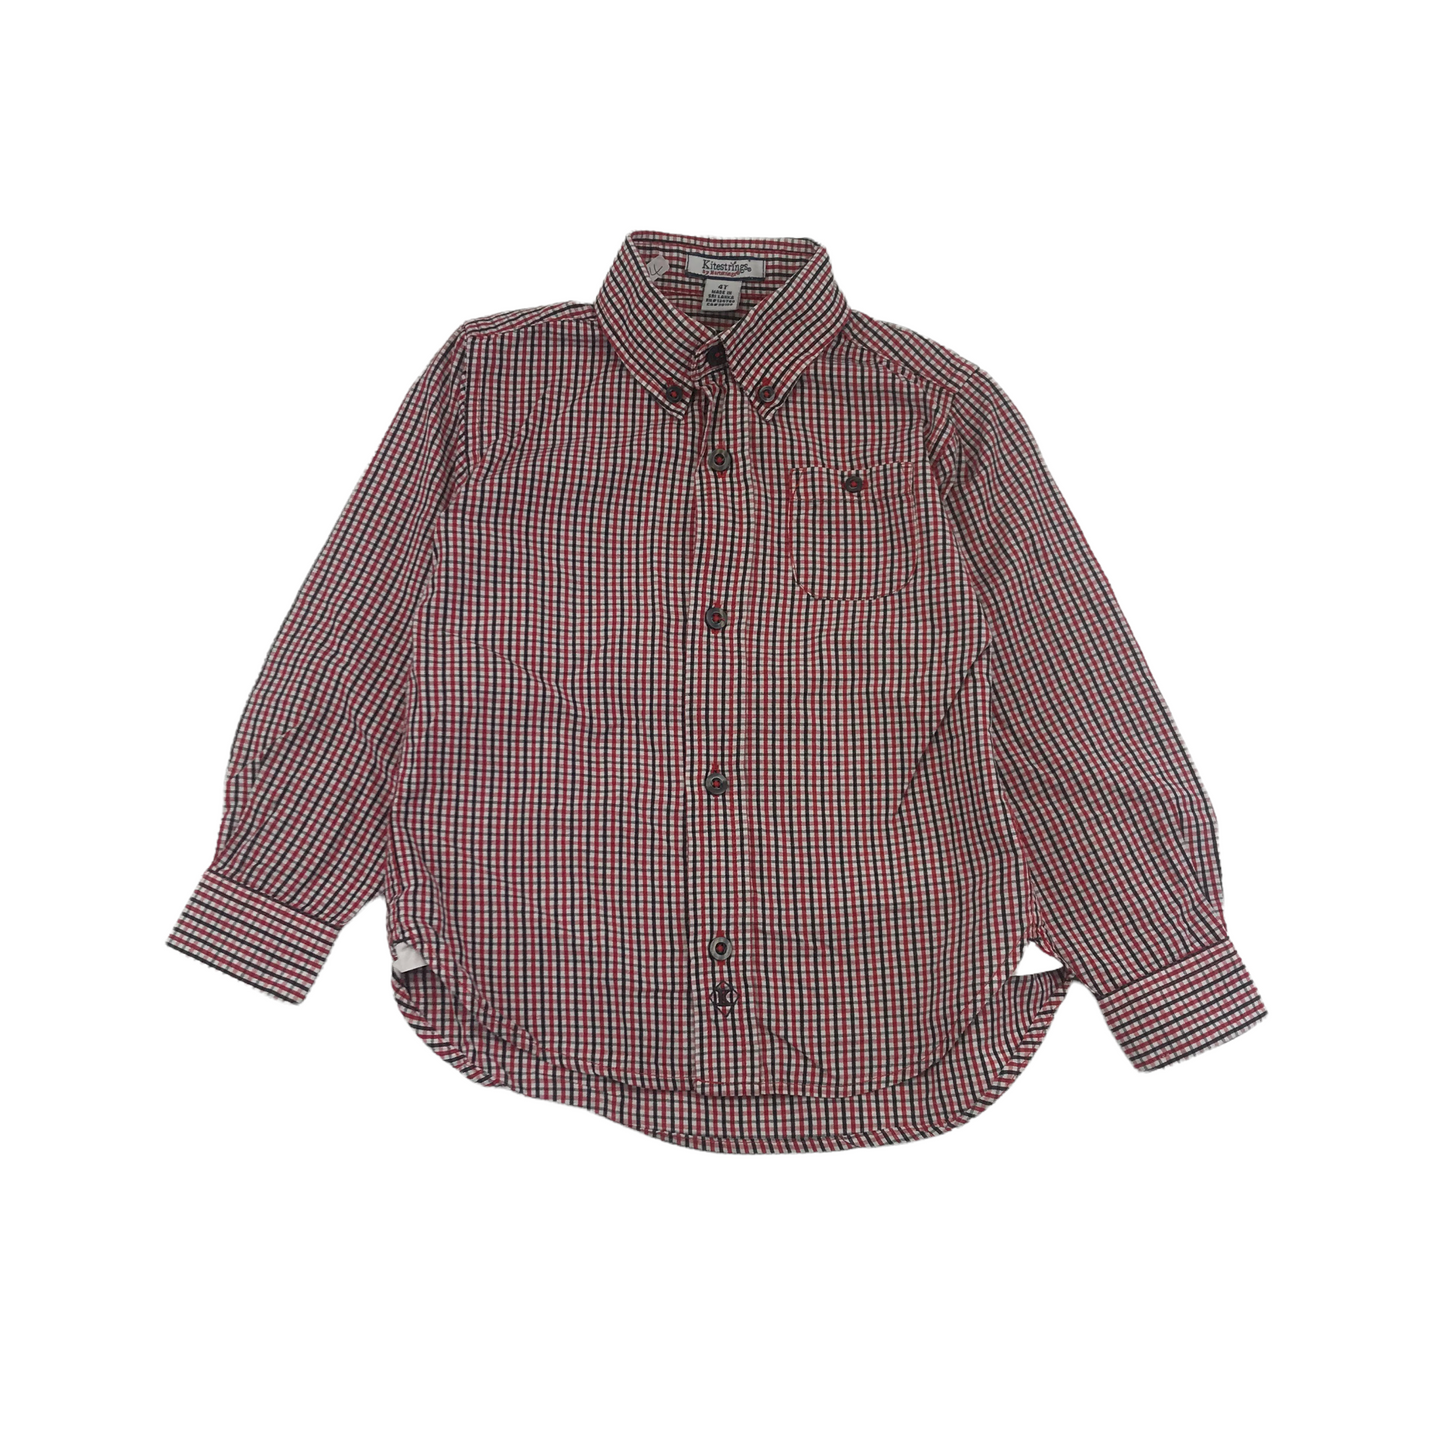 Kitestrings Checked Red and White Shirt Age 4